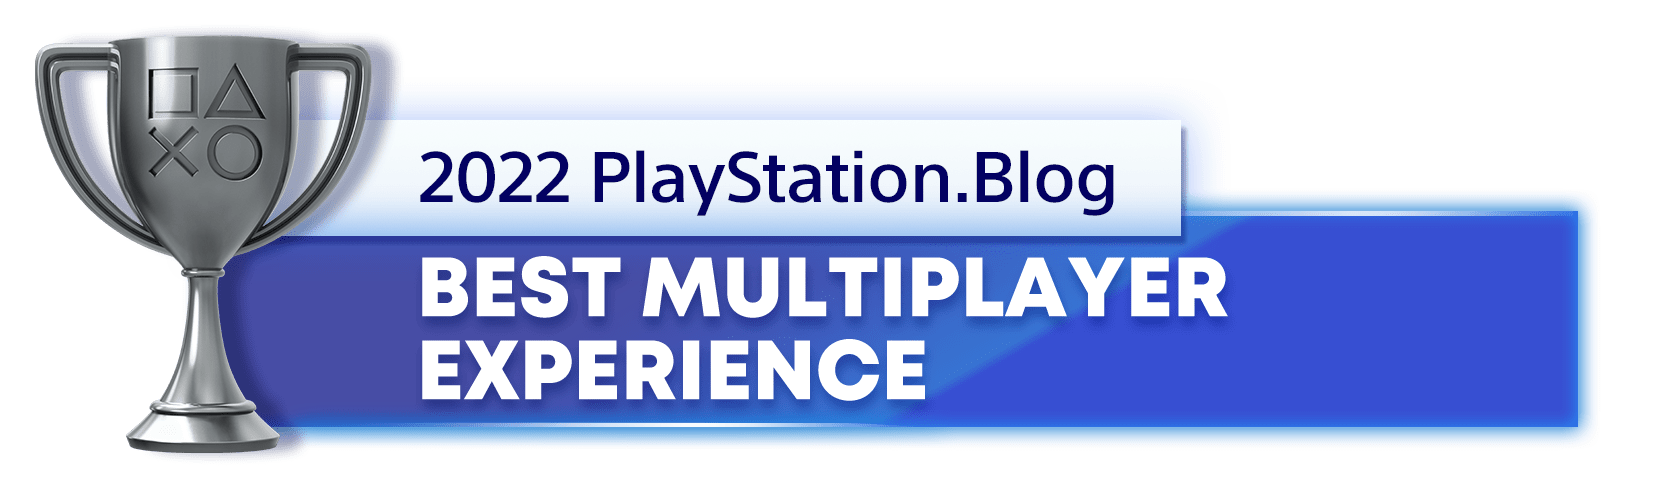 PlayStation Blog's 2022 Silver trophy for best multiplayer experience